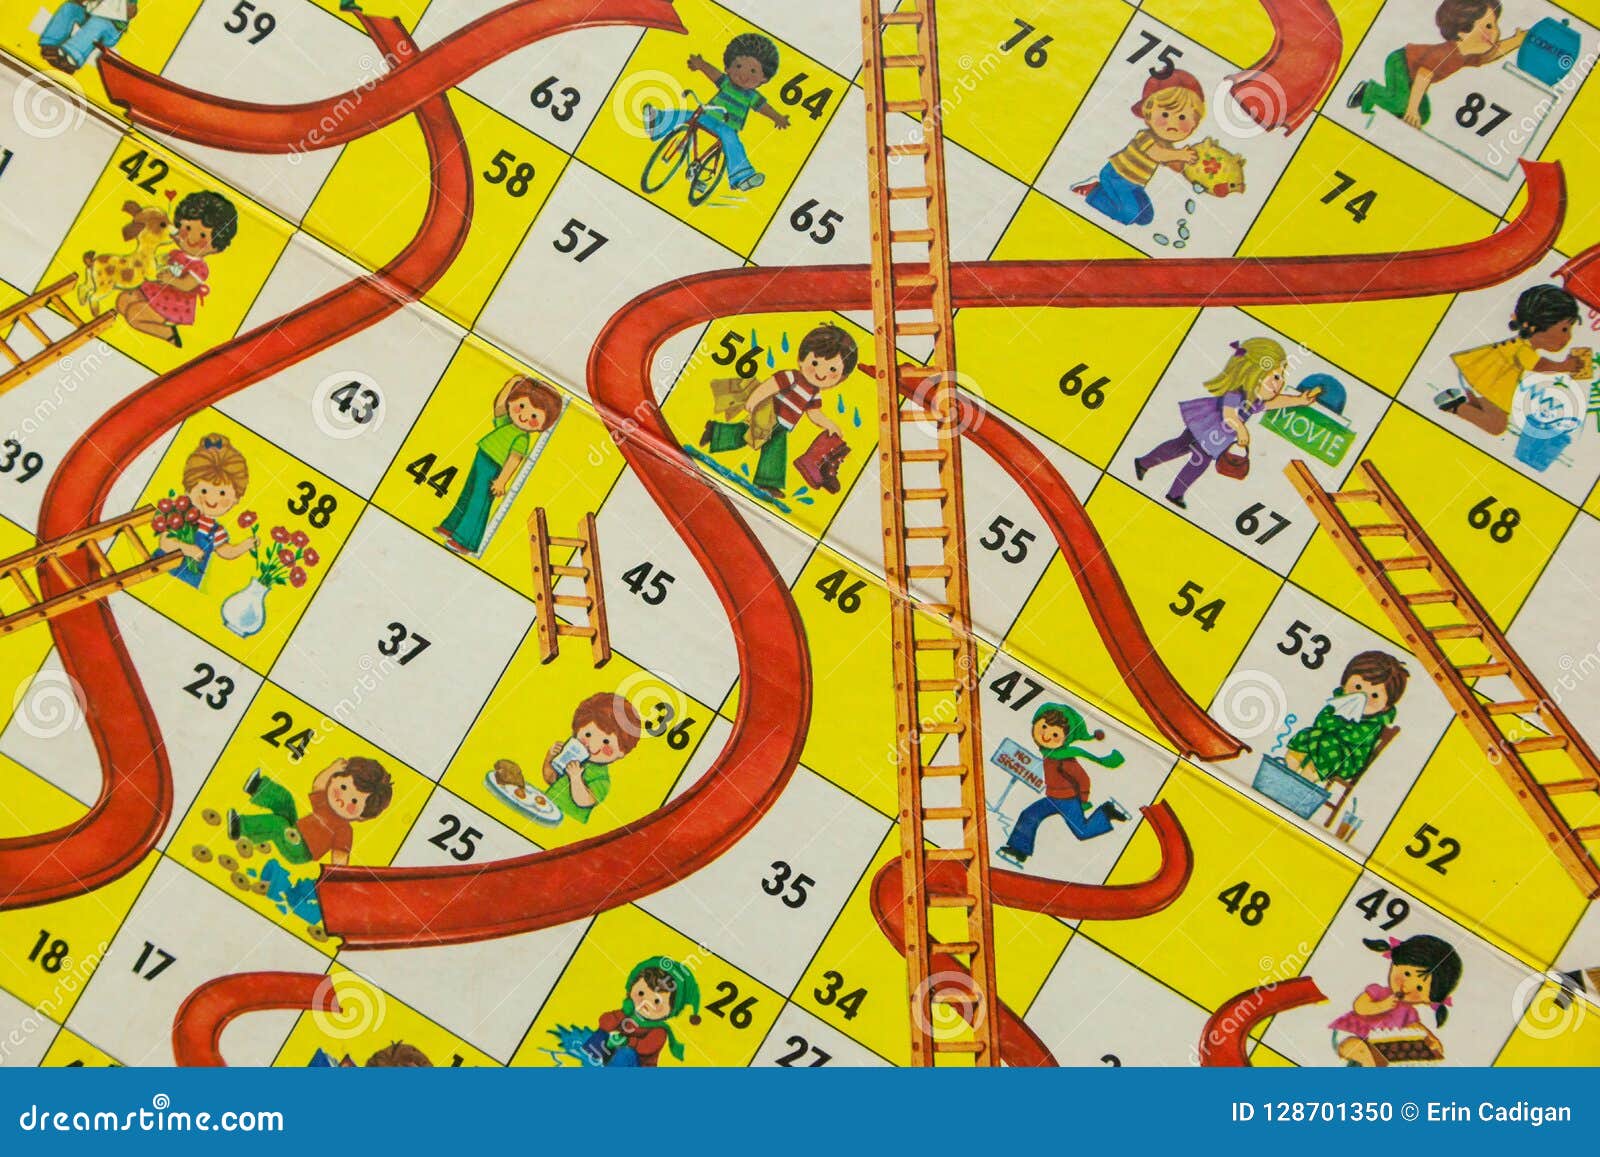 instructions for chutes and ladders board game